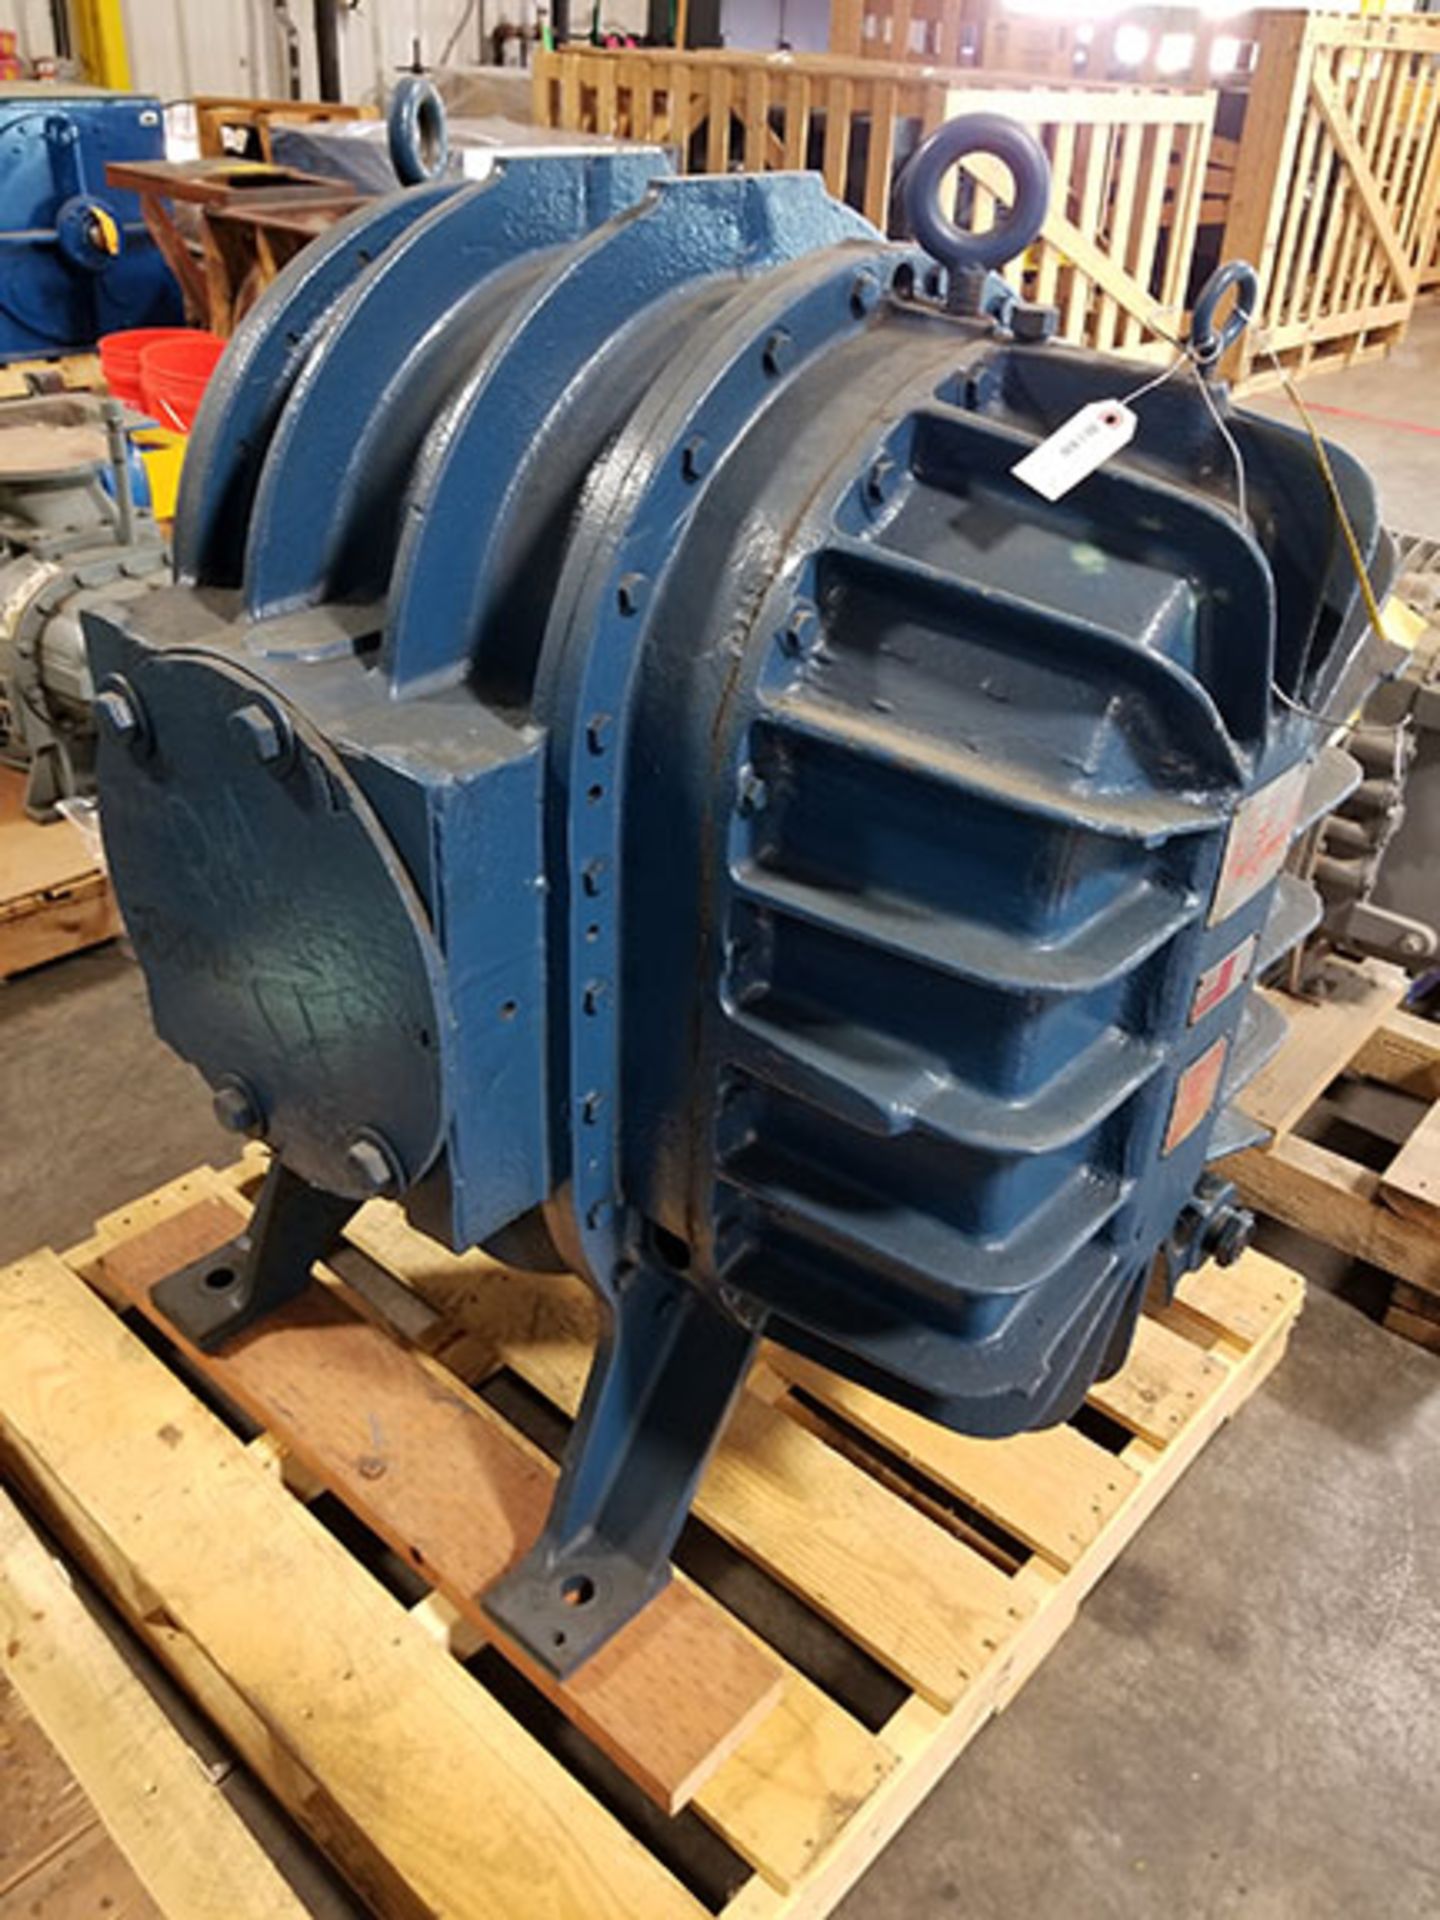 ROTARY LOBE BLOWER, 12" C 16" RAS-V WITH IBB, 35574 INLET VOLUME, 845 RPM, 1998, 68 G. DISCHARGE